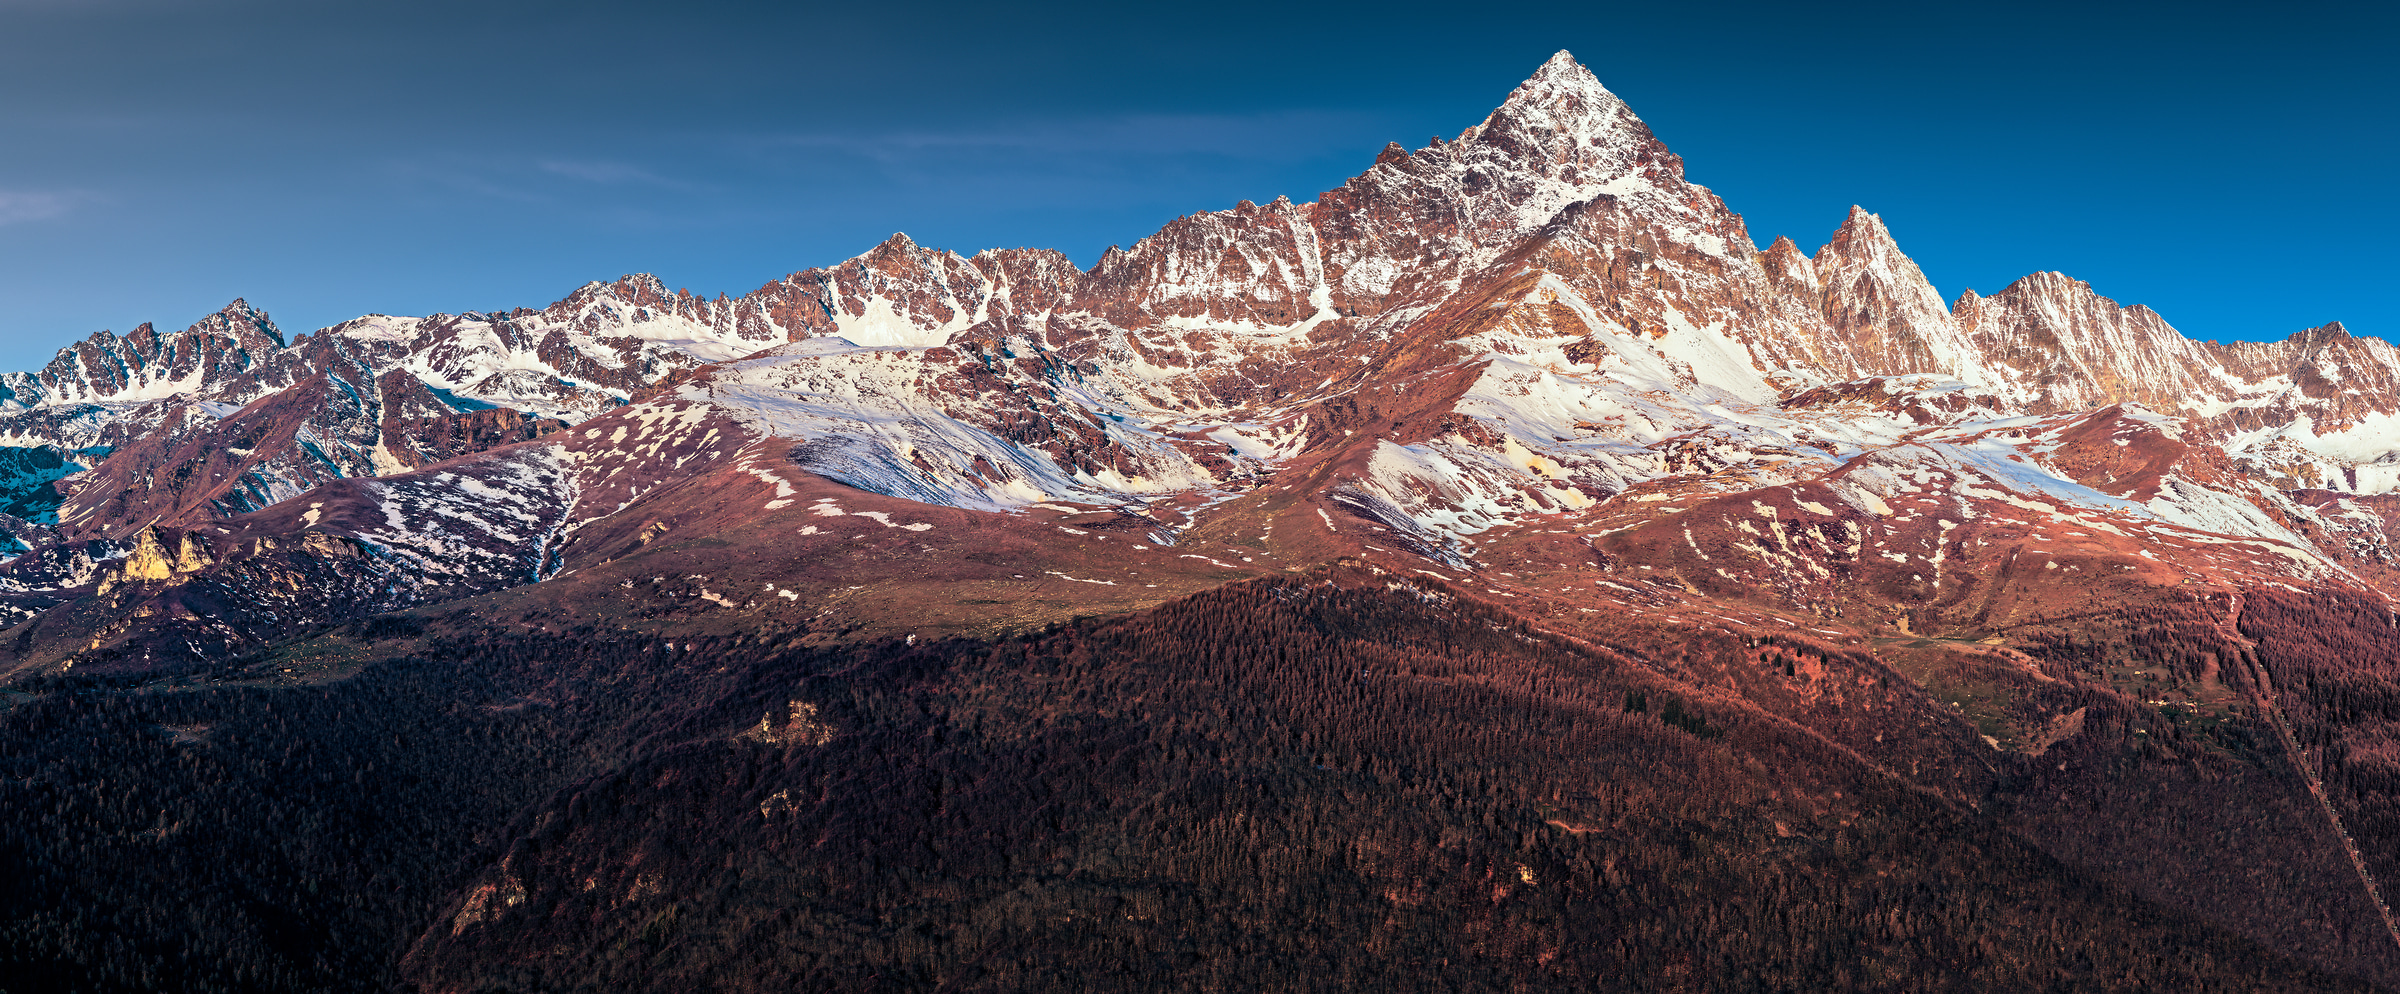 1,698 megapixels! A very high resolution, large-format VAST photo print of Monviso in the Alps; landscape photograph created by Duilio Fiorille in Monviso, Ostana, Piedmont, Italy